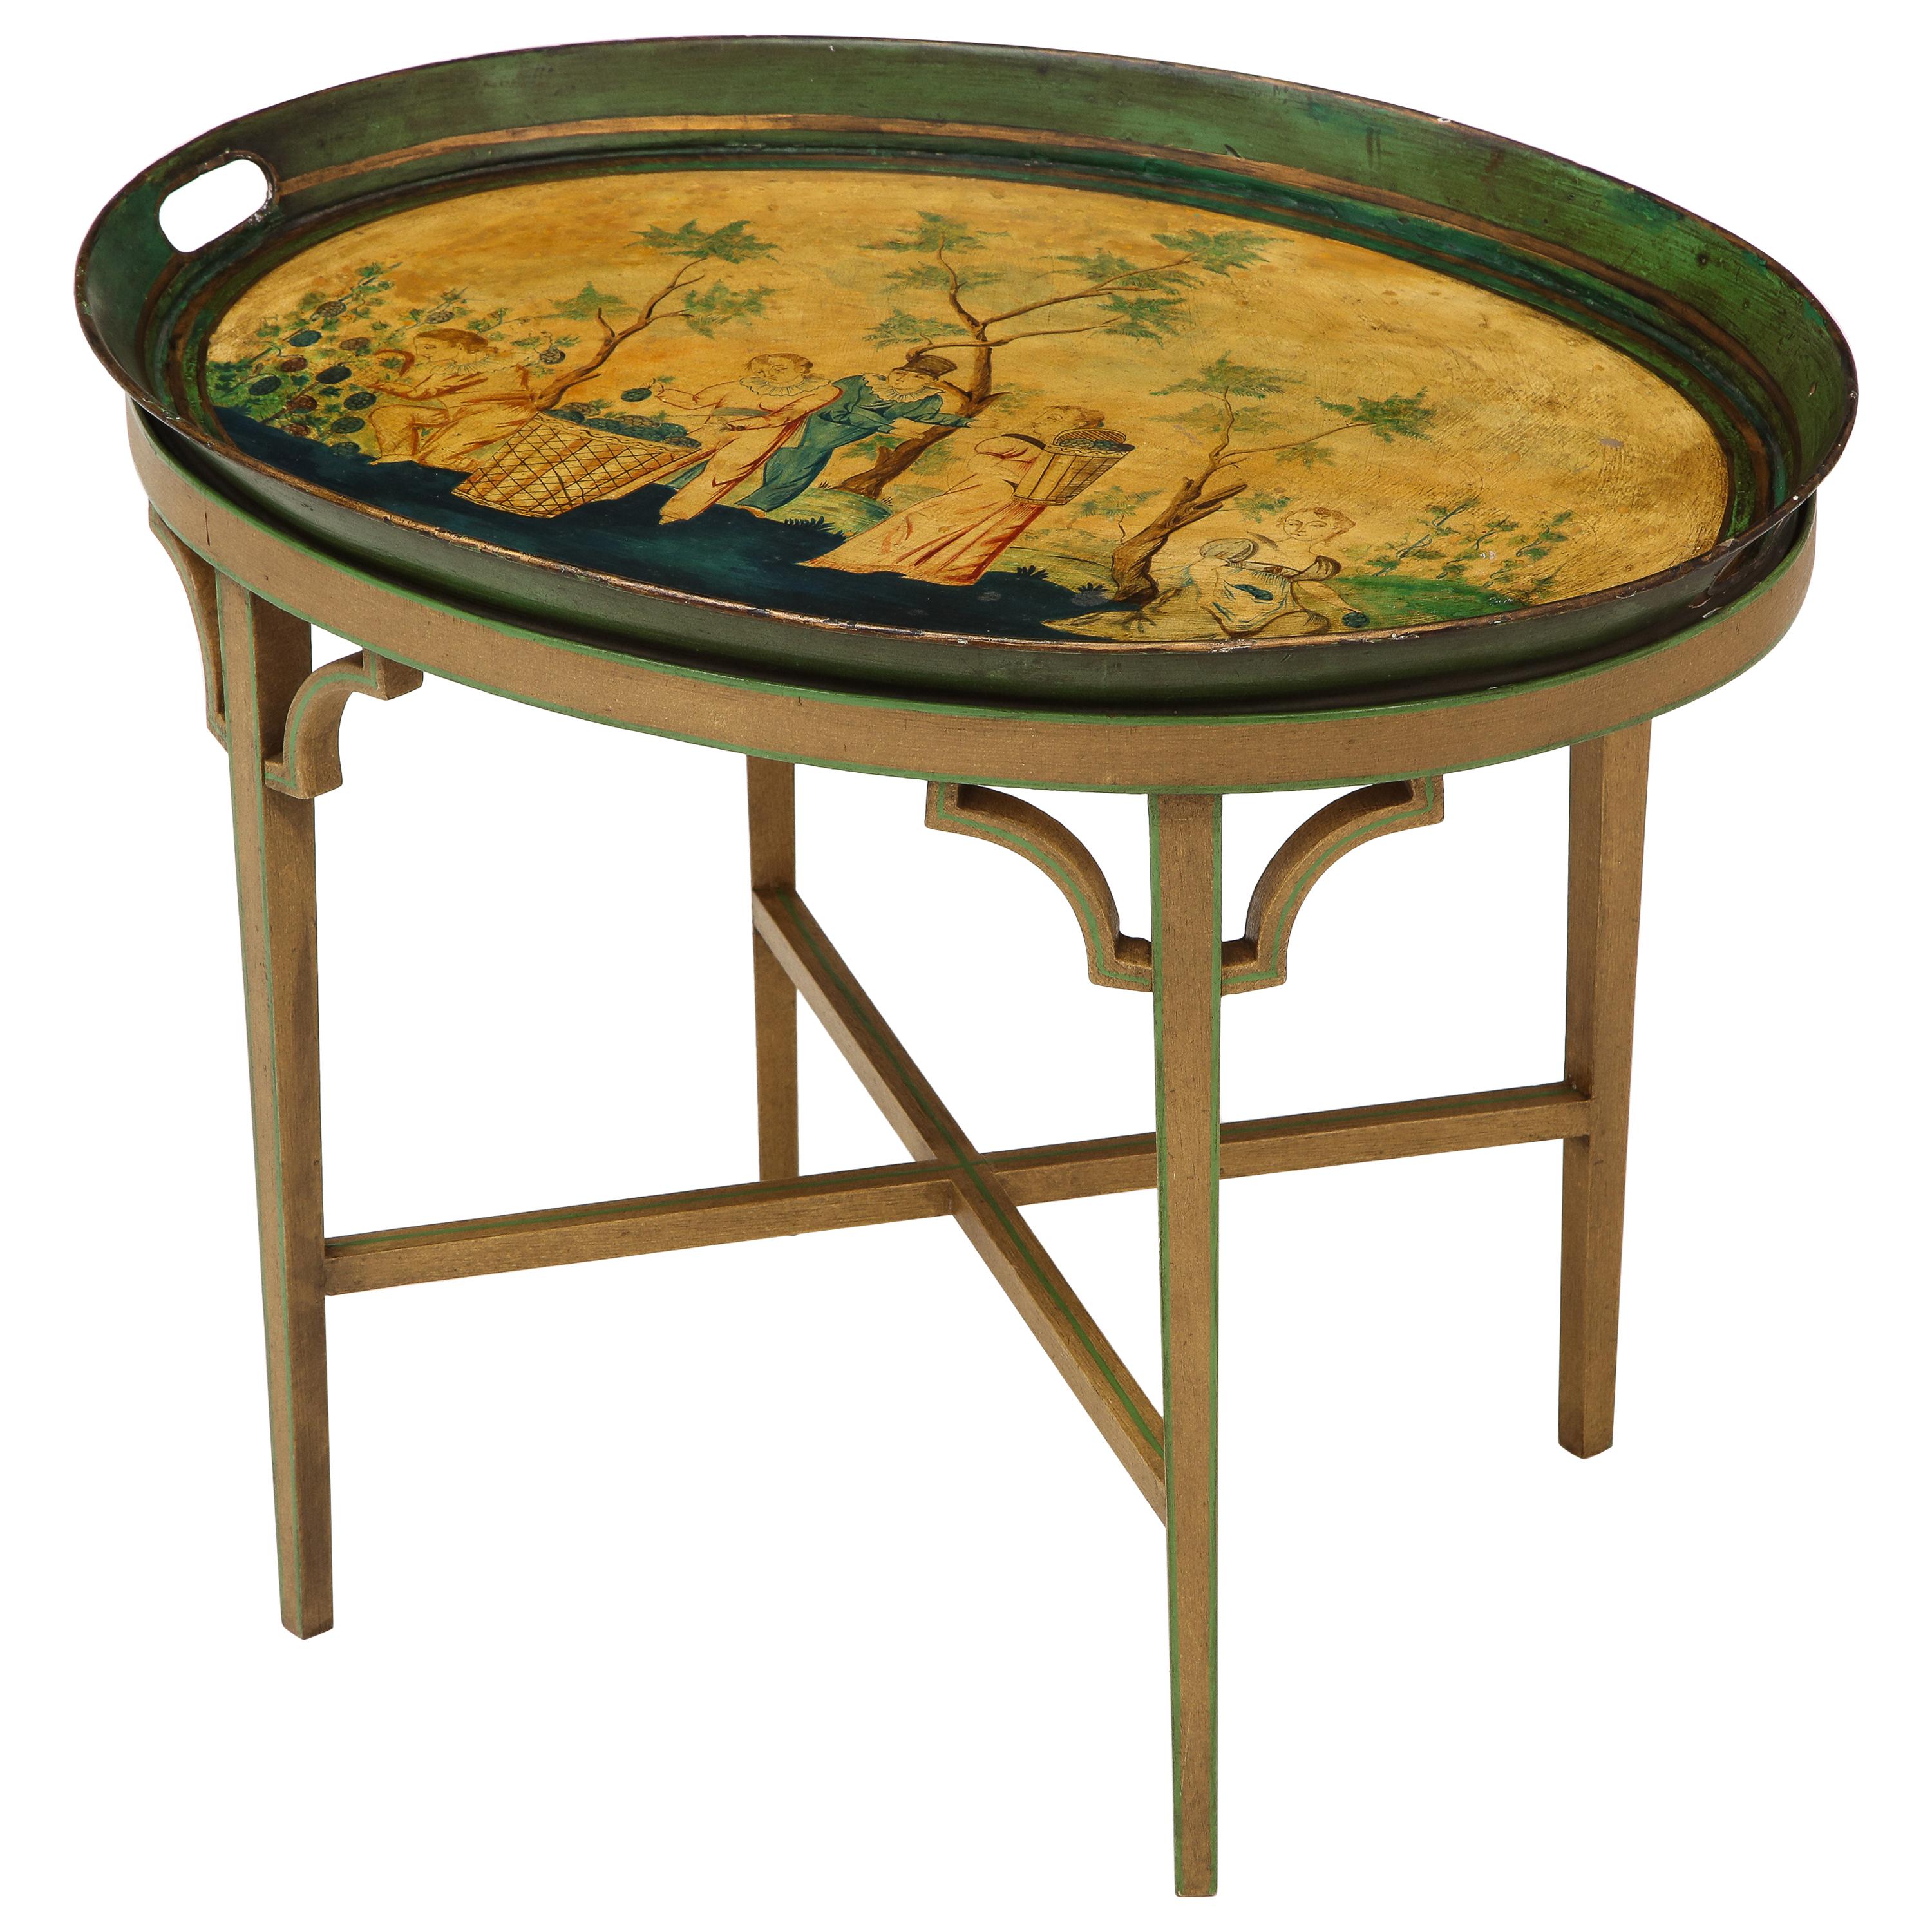 Oval Tray Table Decorated with European Pastoral Scene